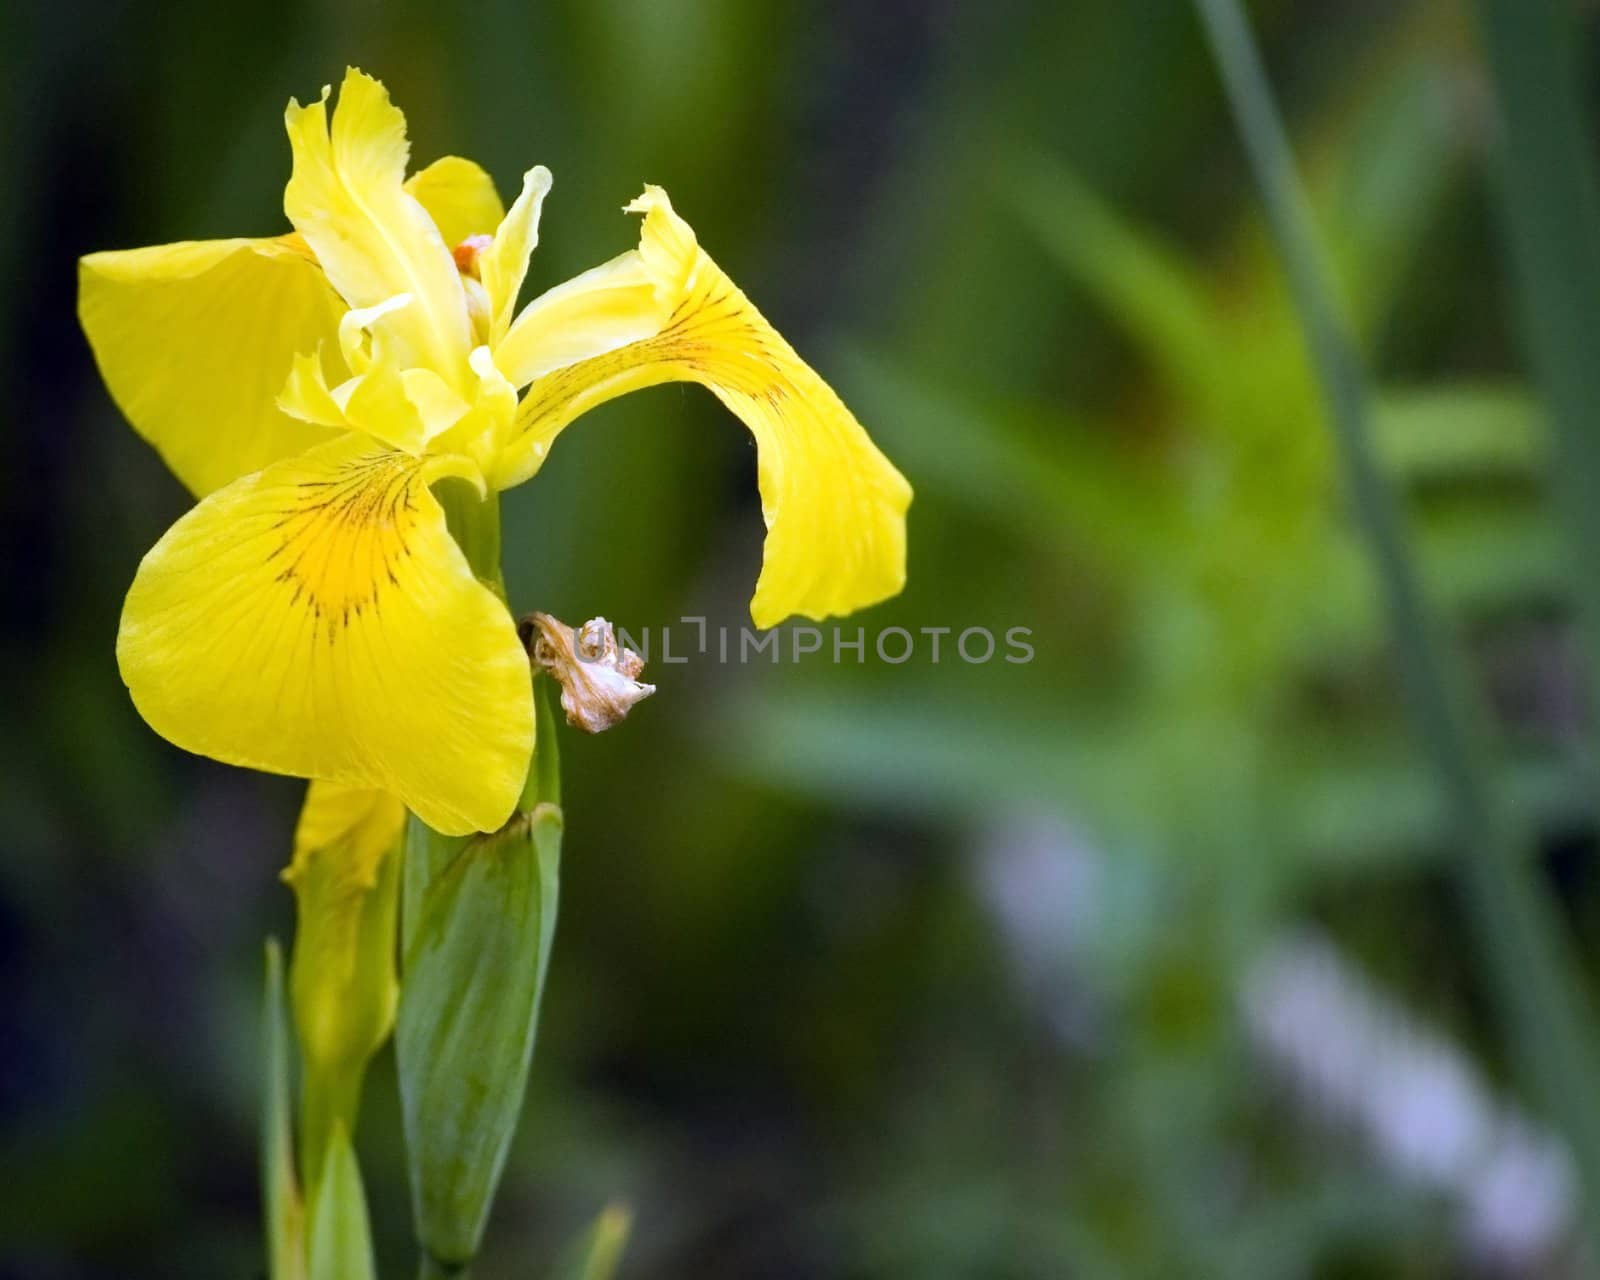 A yellow iris blossom in the wild.